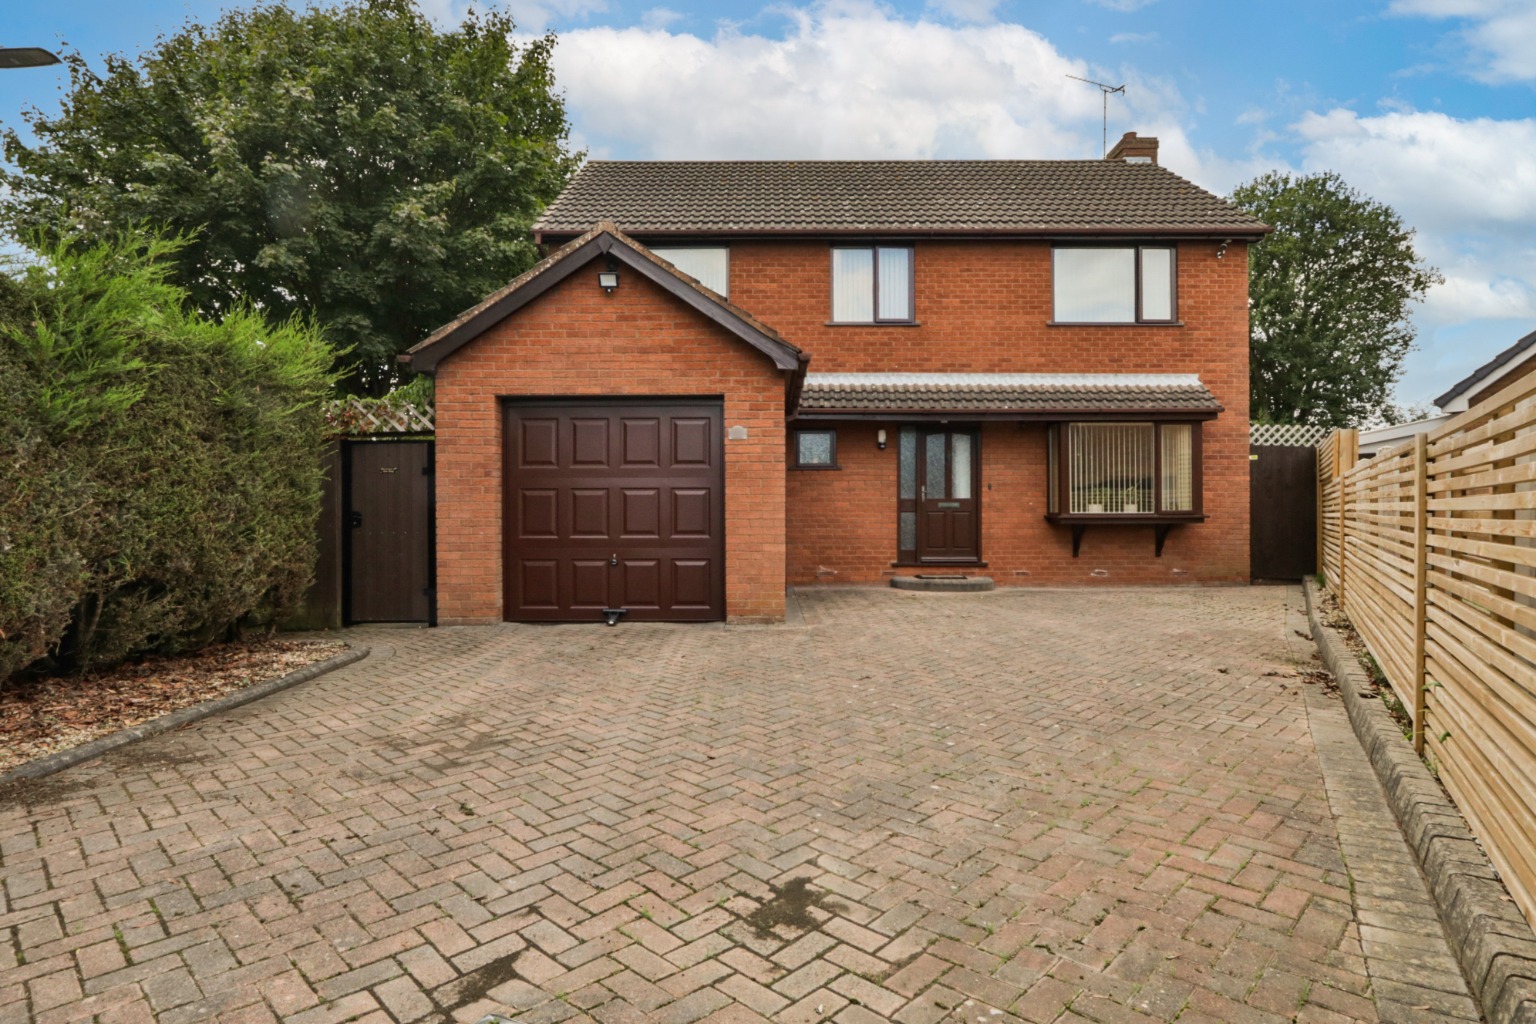 4 bed detached house for sale in Deans Drive, Hull - Property Image 1